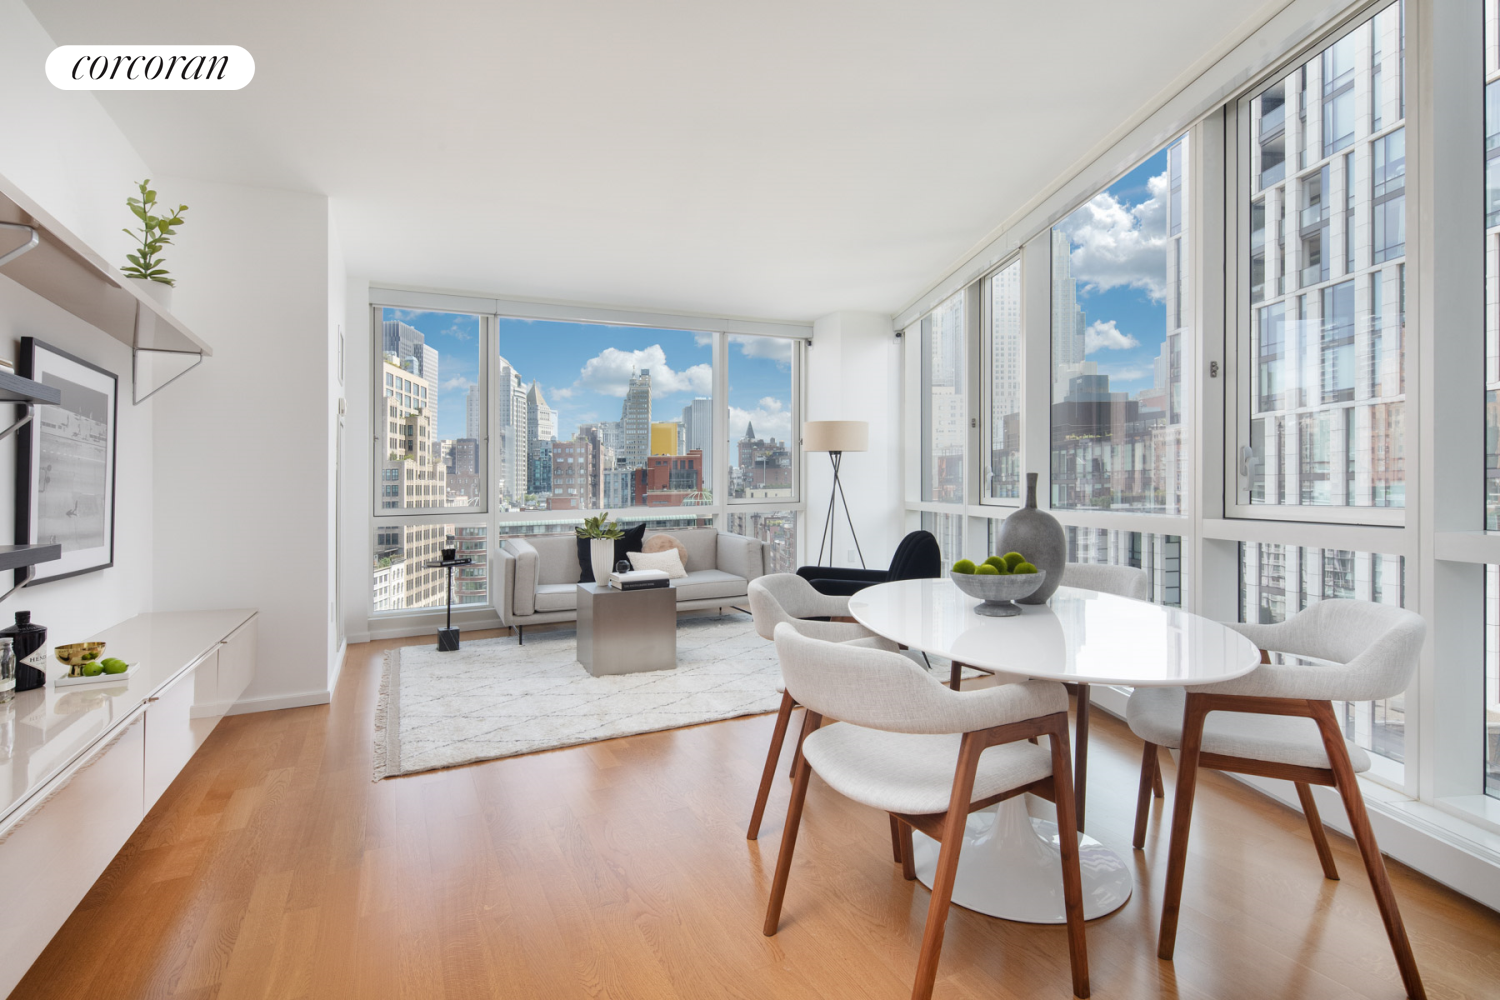 200 Chambers Street 12G, Tribeca, Downtown, NYC - 2 Bedrooms  
2.5 Bathrooms  
5 Rooms - 